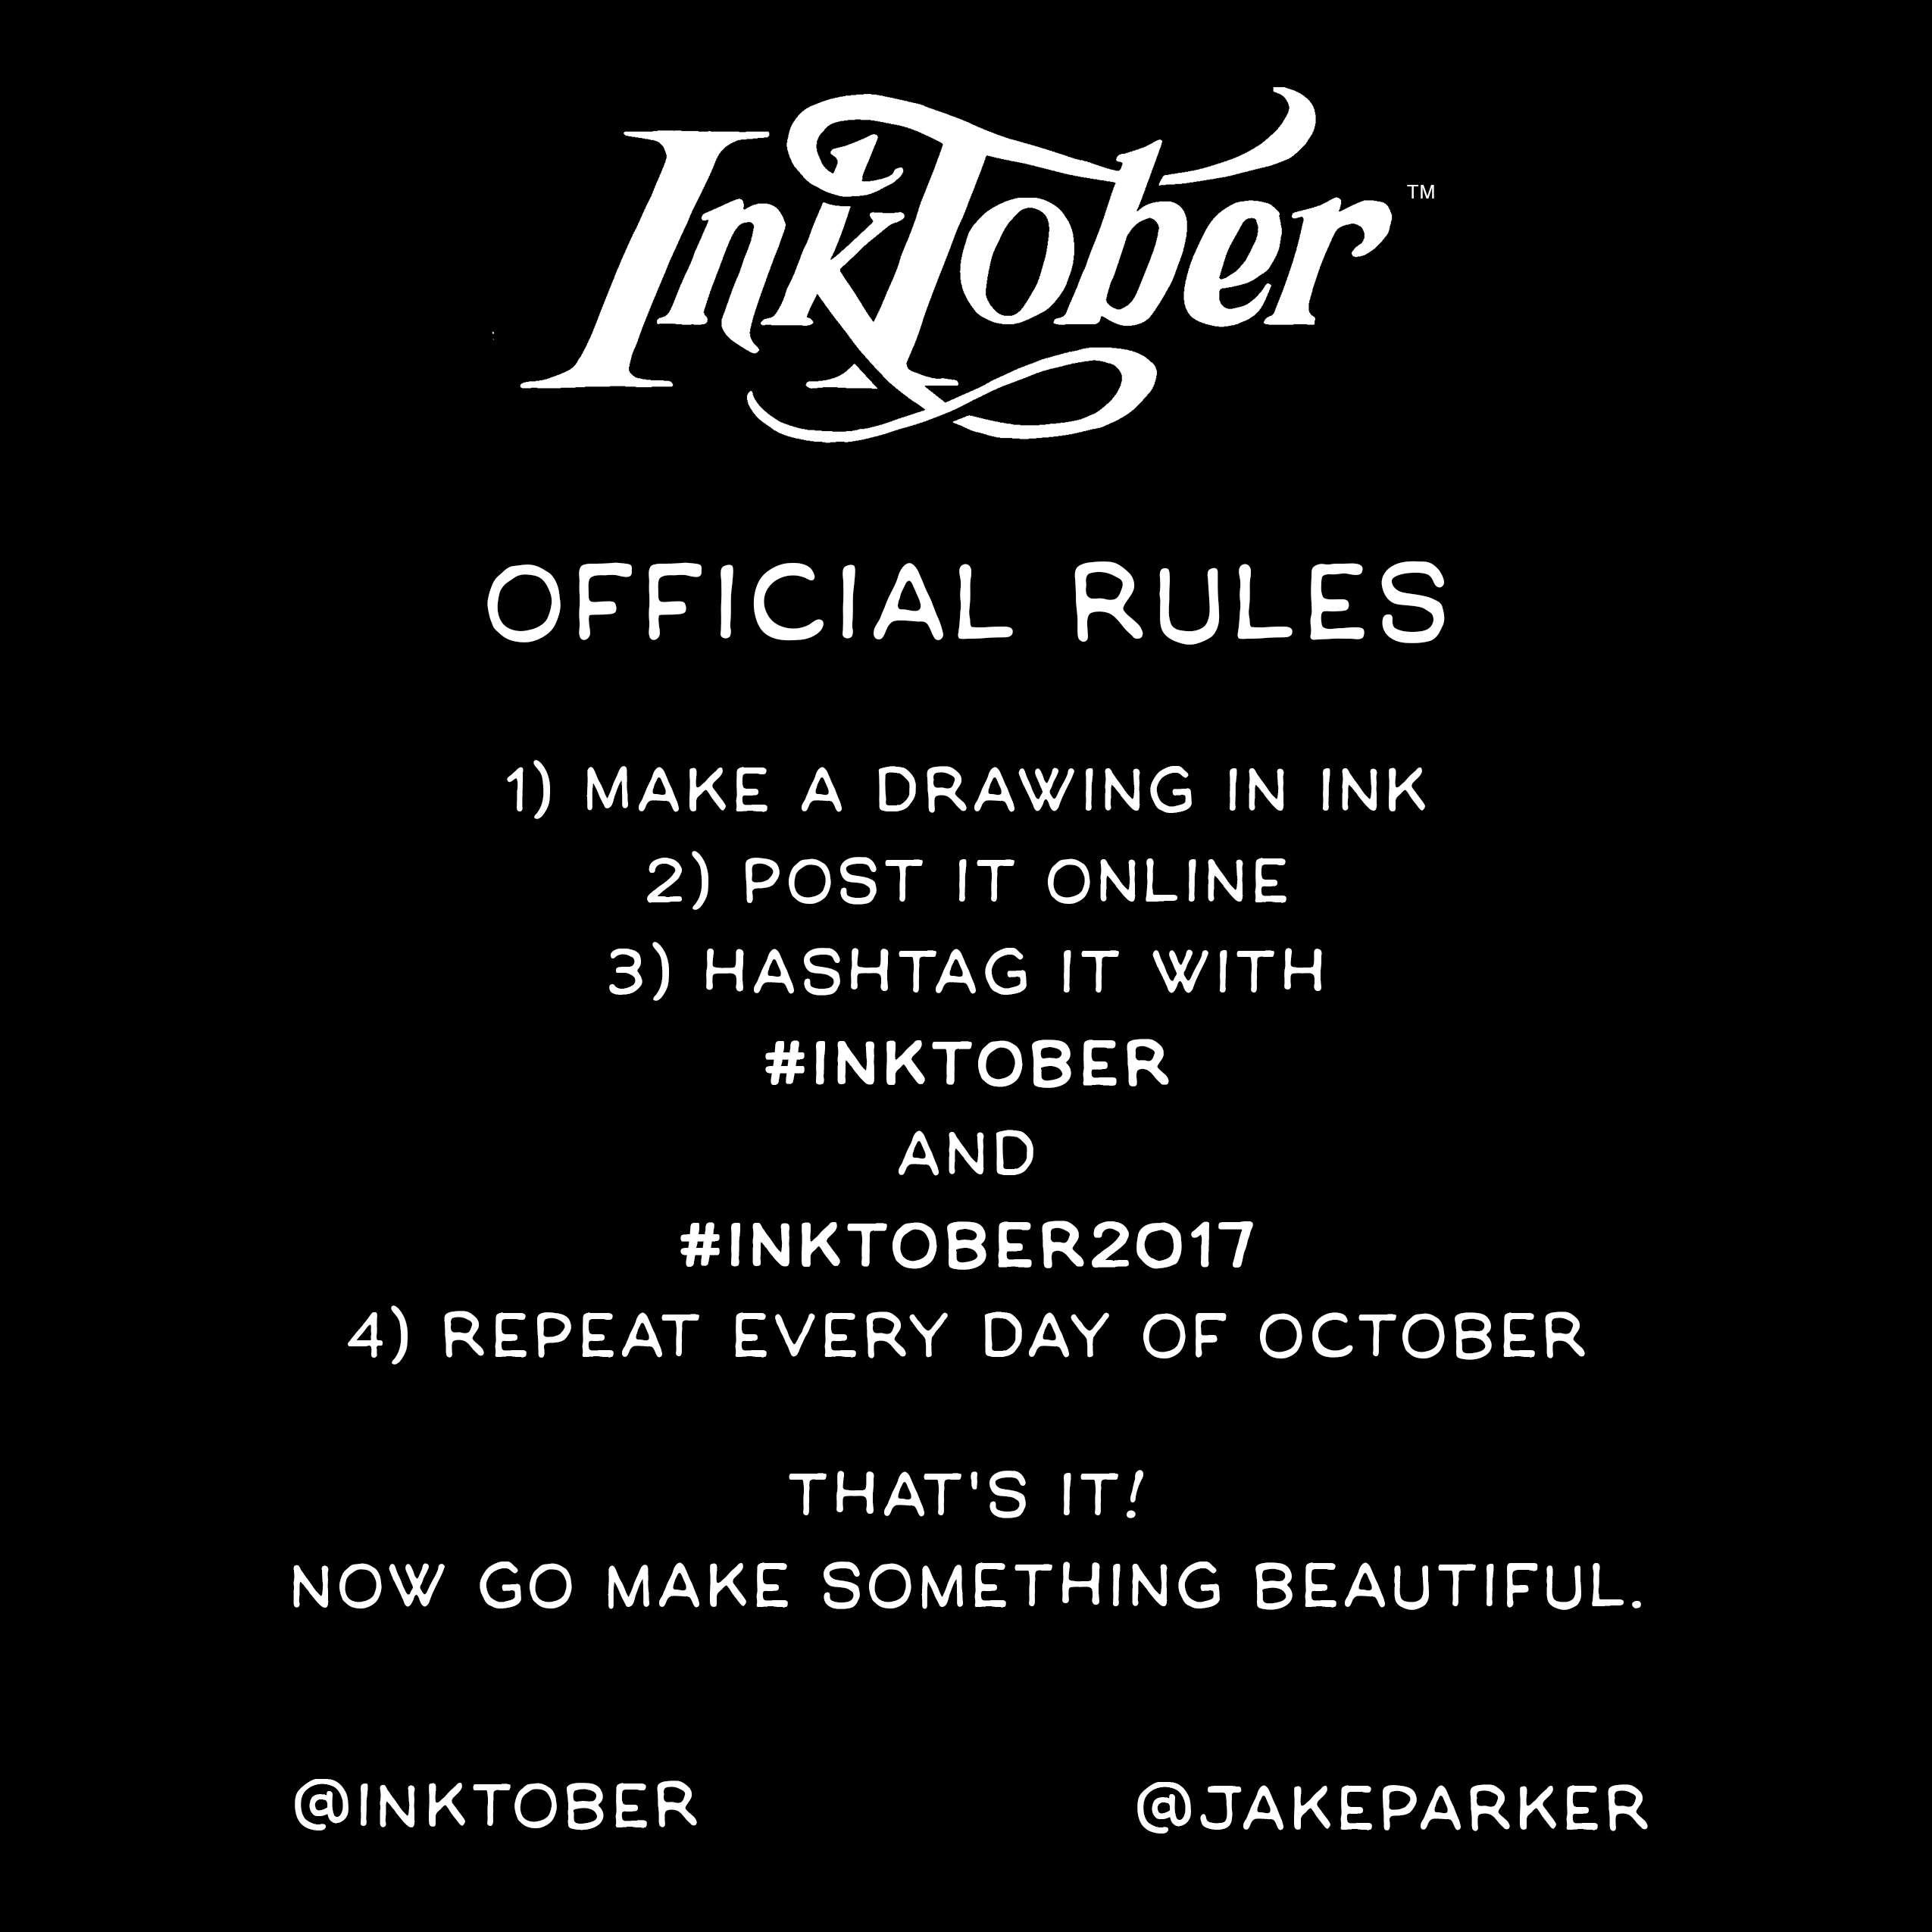 Inktober-officialrules.png